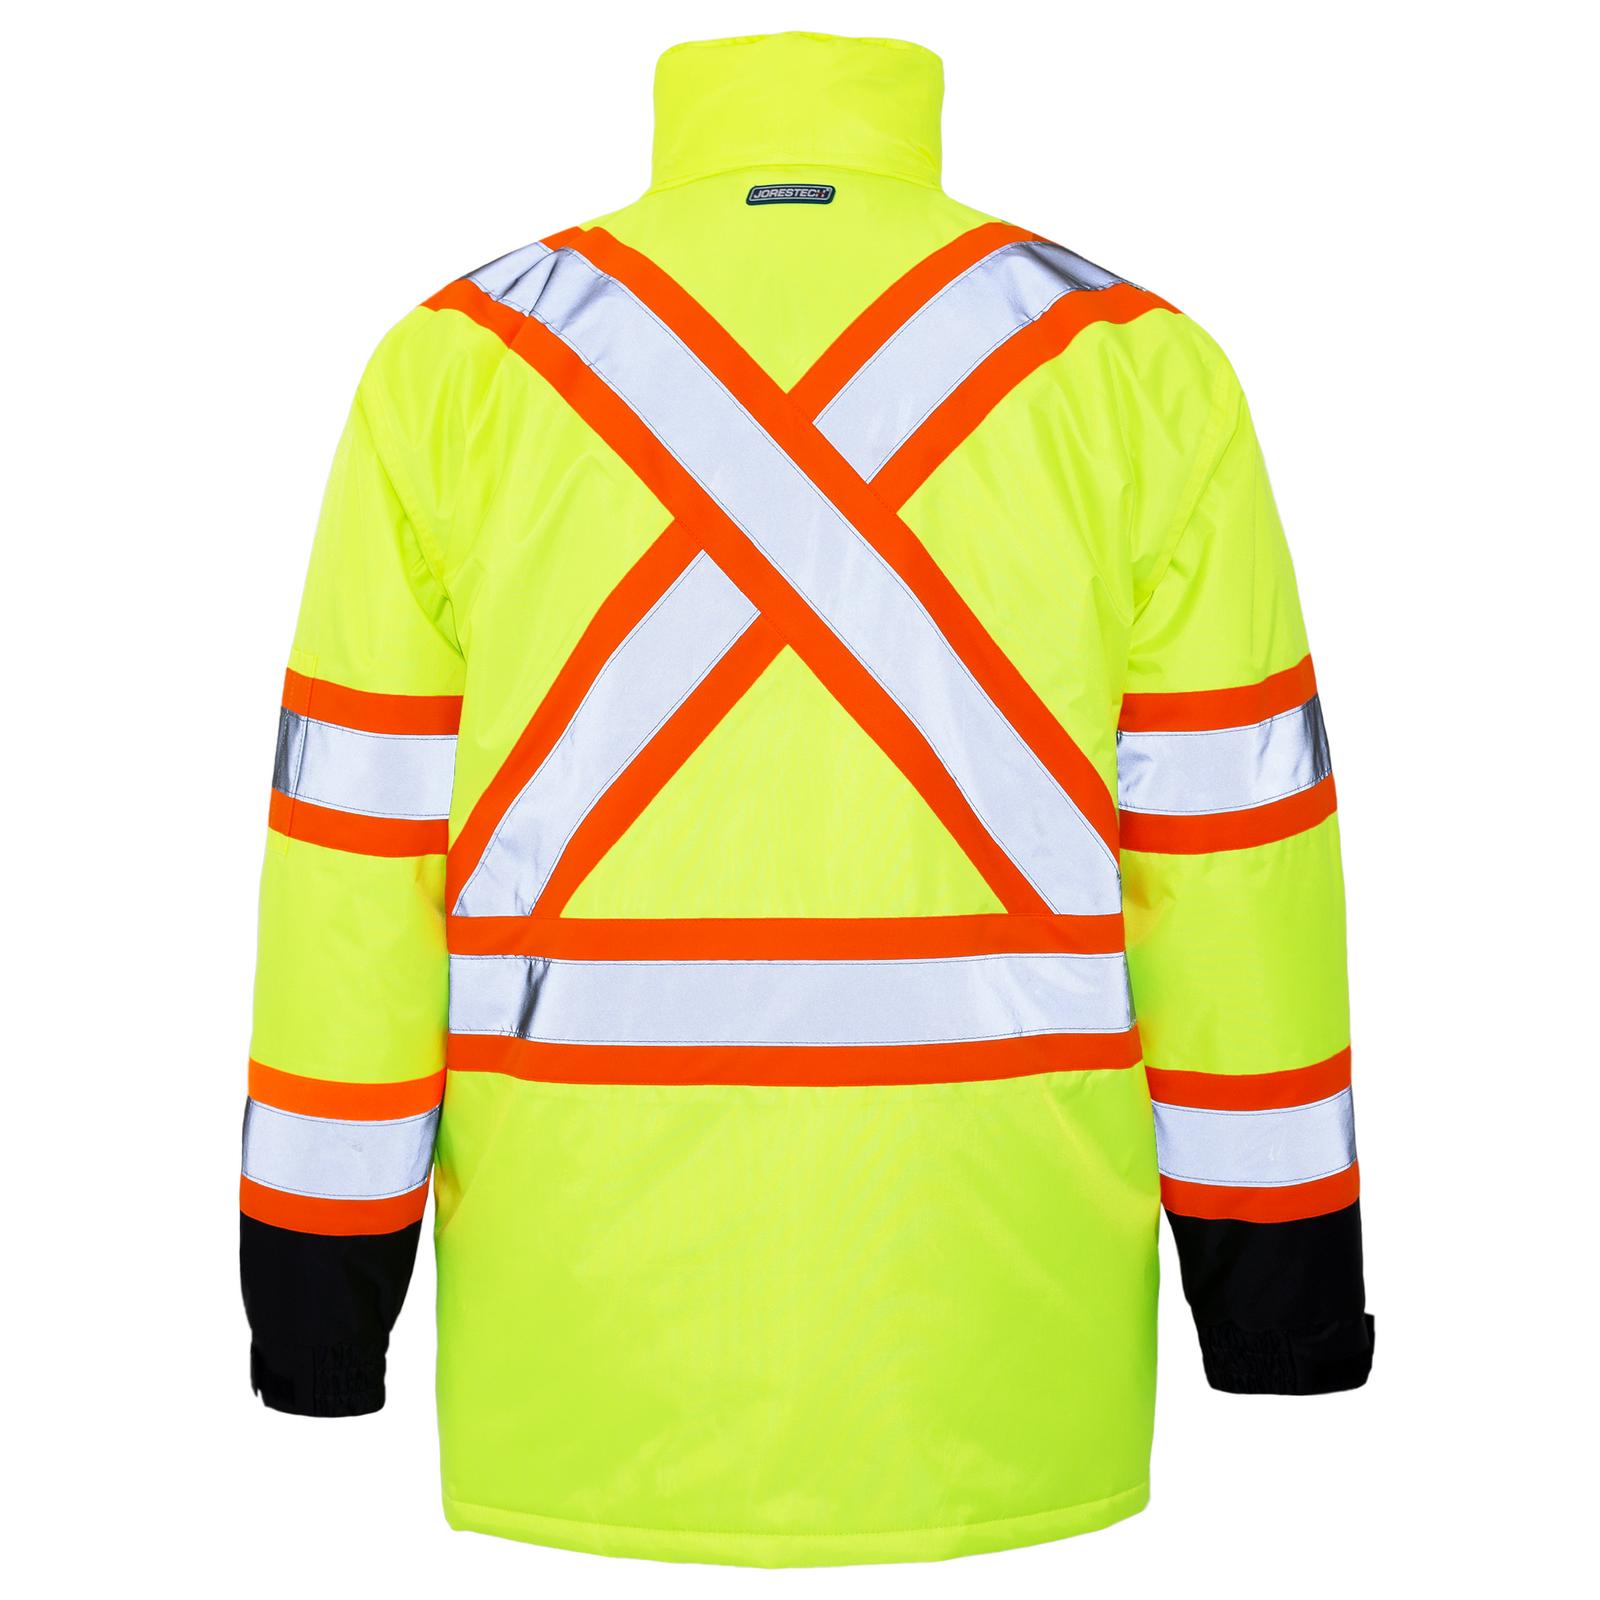 Lime insulated safety jacket with X on back and reflective stripes